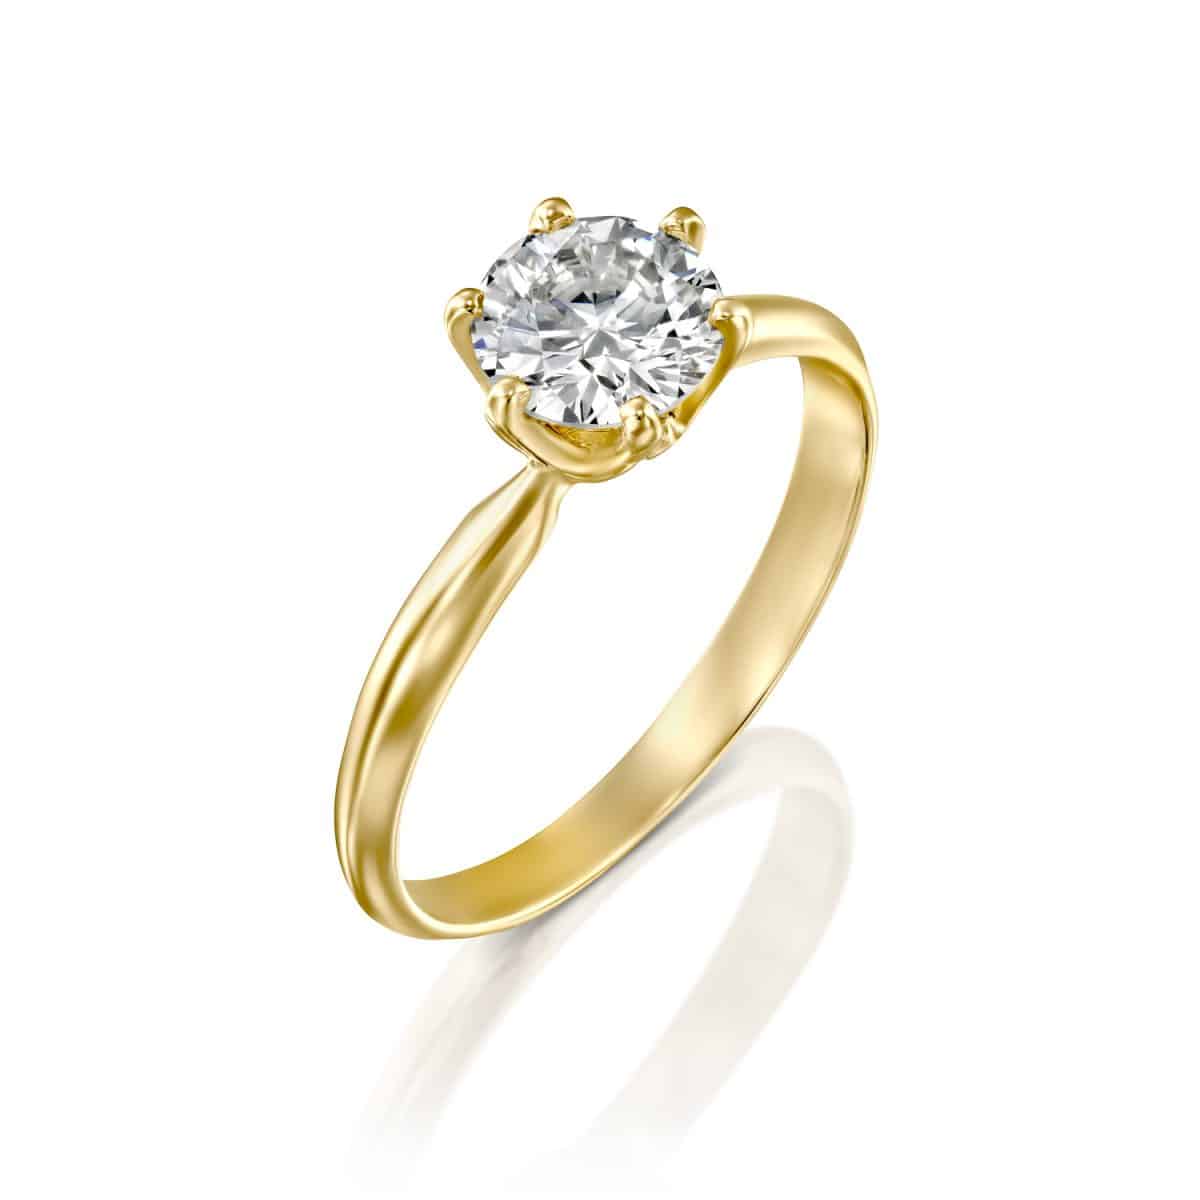 "Claire" - Yellow Gold Lab Grown Diamond Engagement Ring 1.01ct. - main